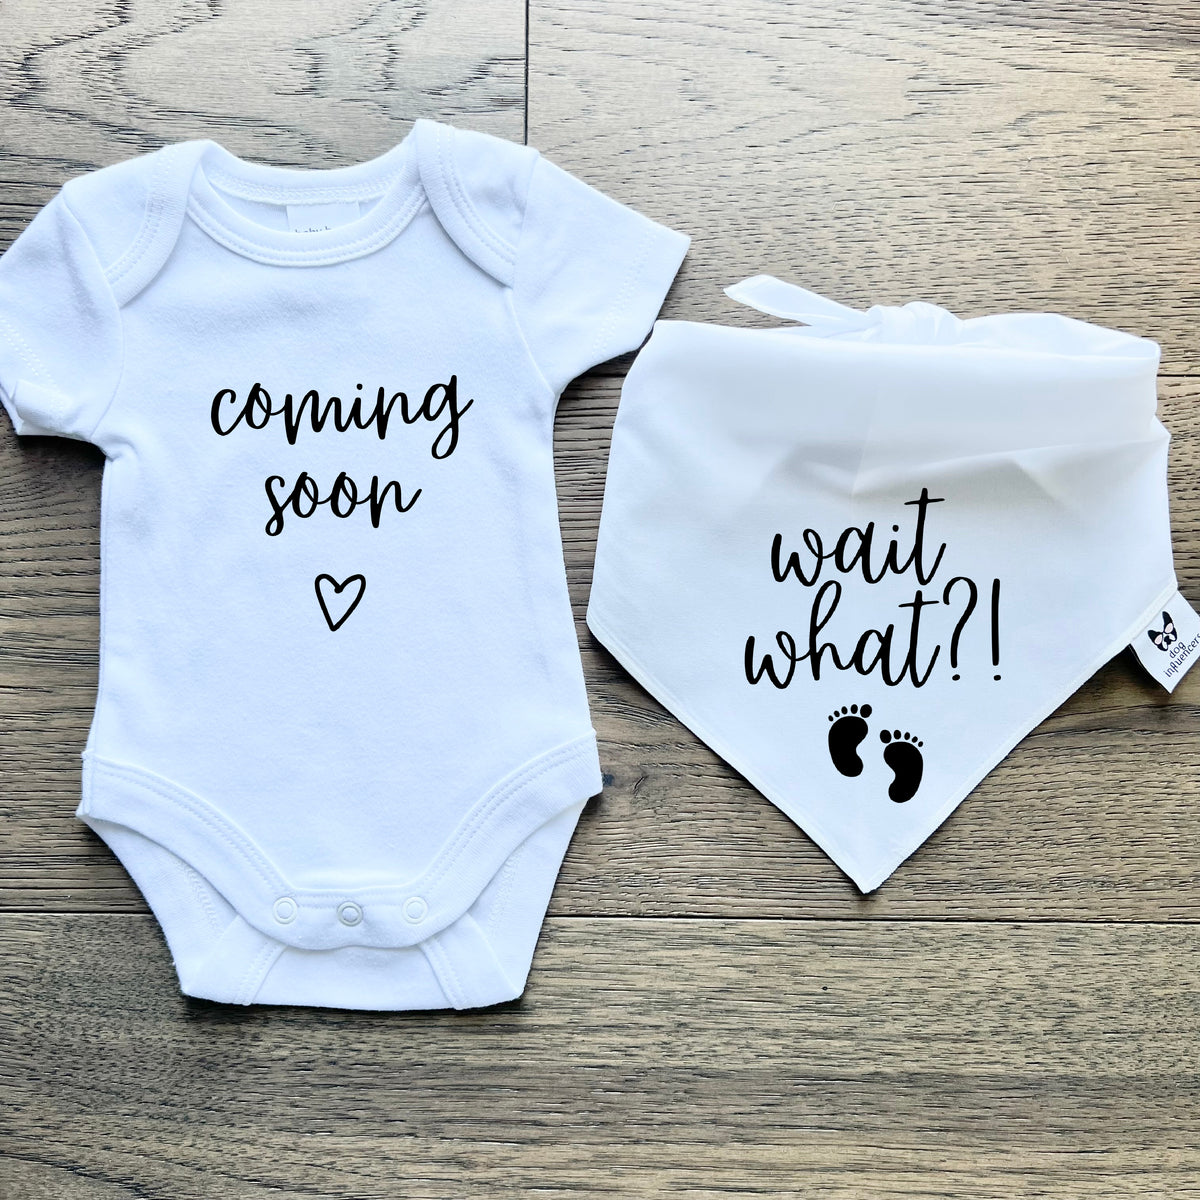 Matching Baby Onesie and Dog Bandana Pregnancy Announcement - Coming Soon - White